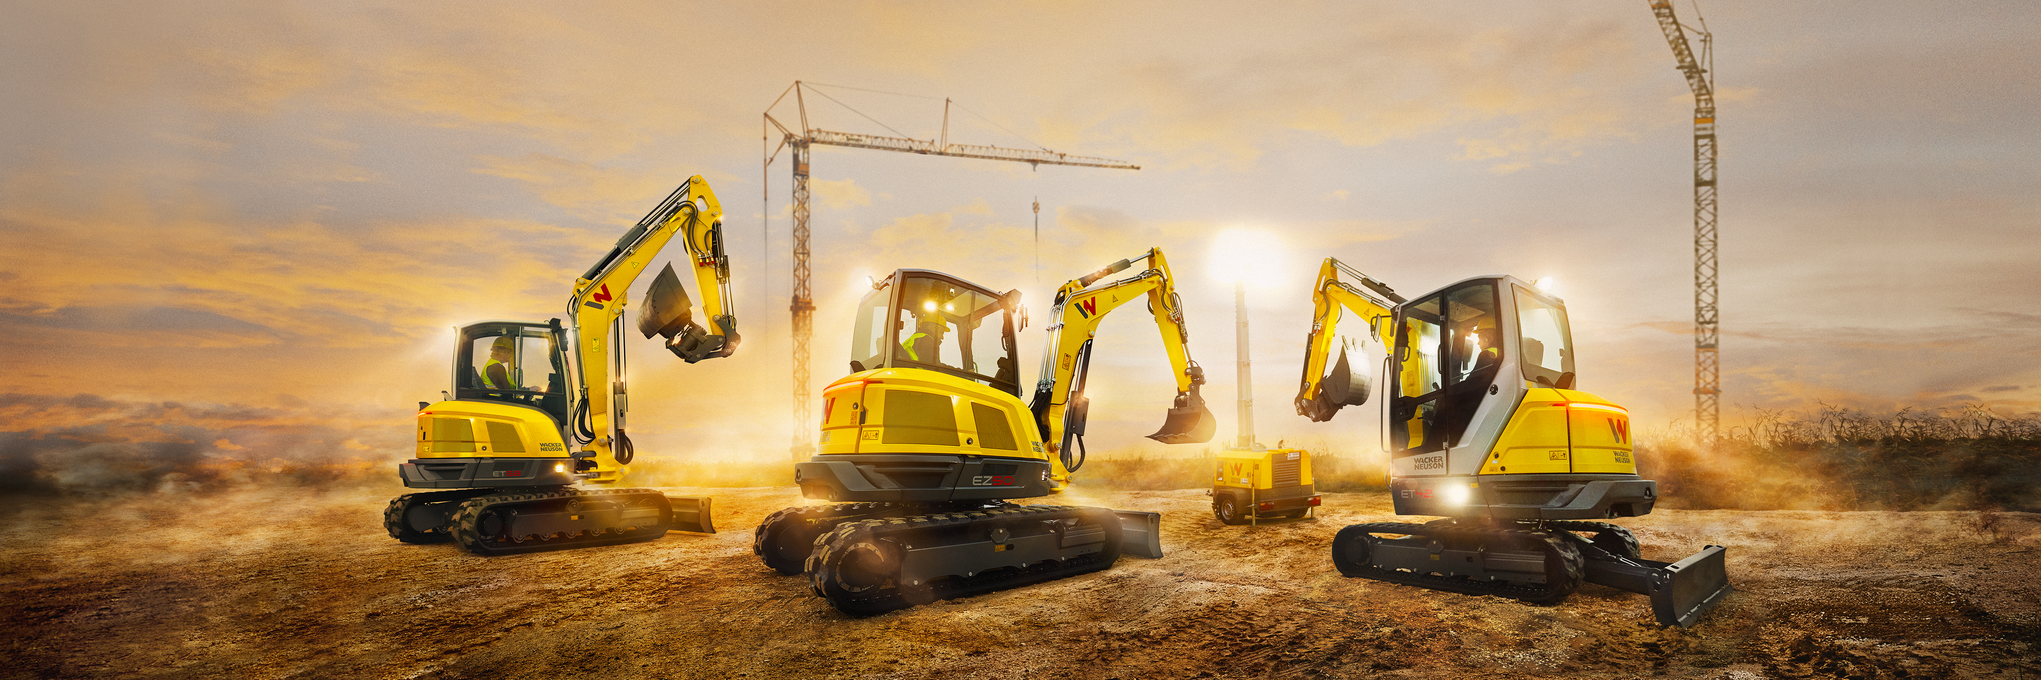 Wacker Neuson tracked excavator ET58 with other Wacker Neuson construction machines on a construction site at sunset.